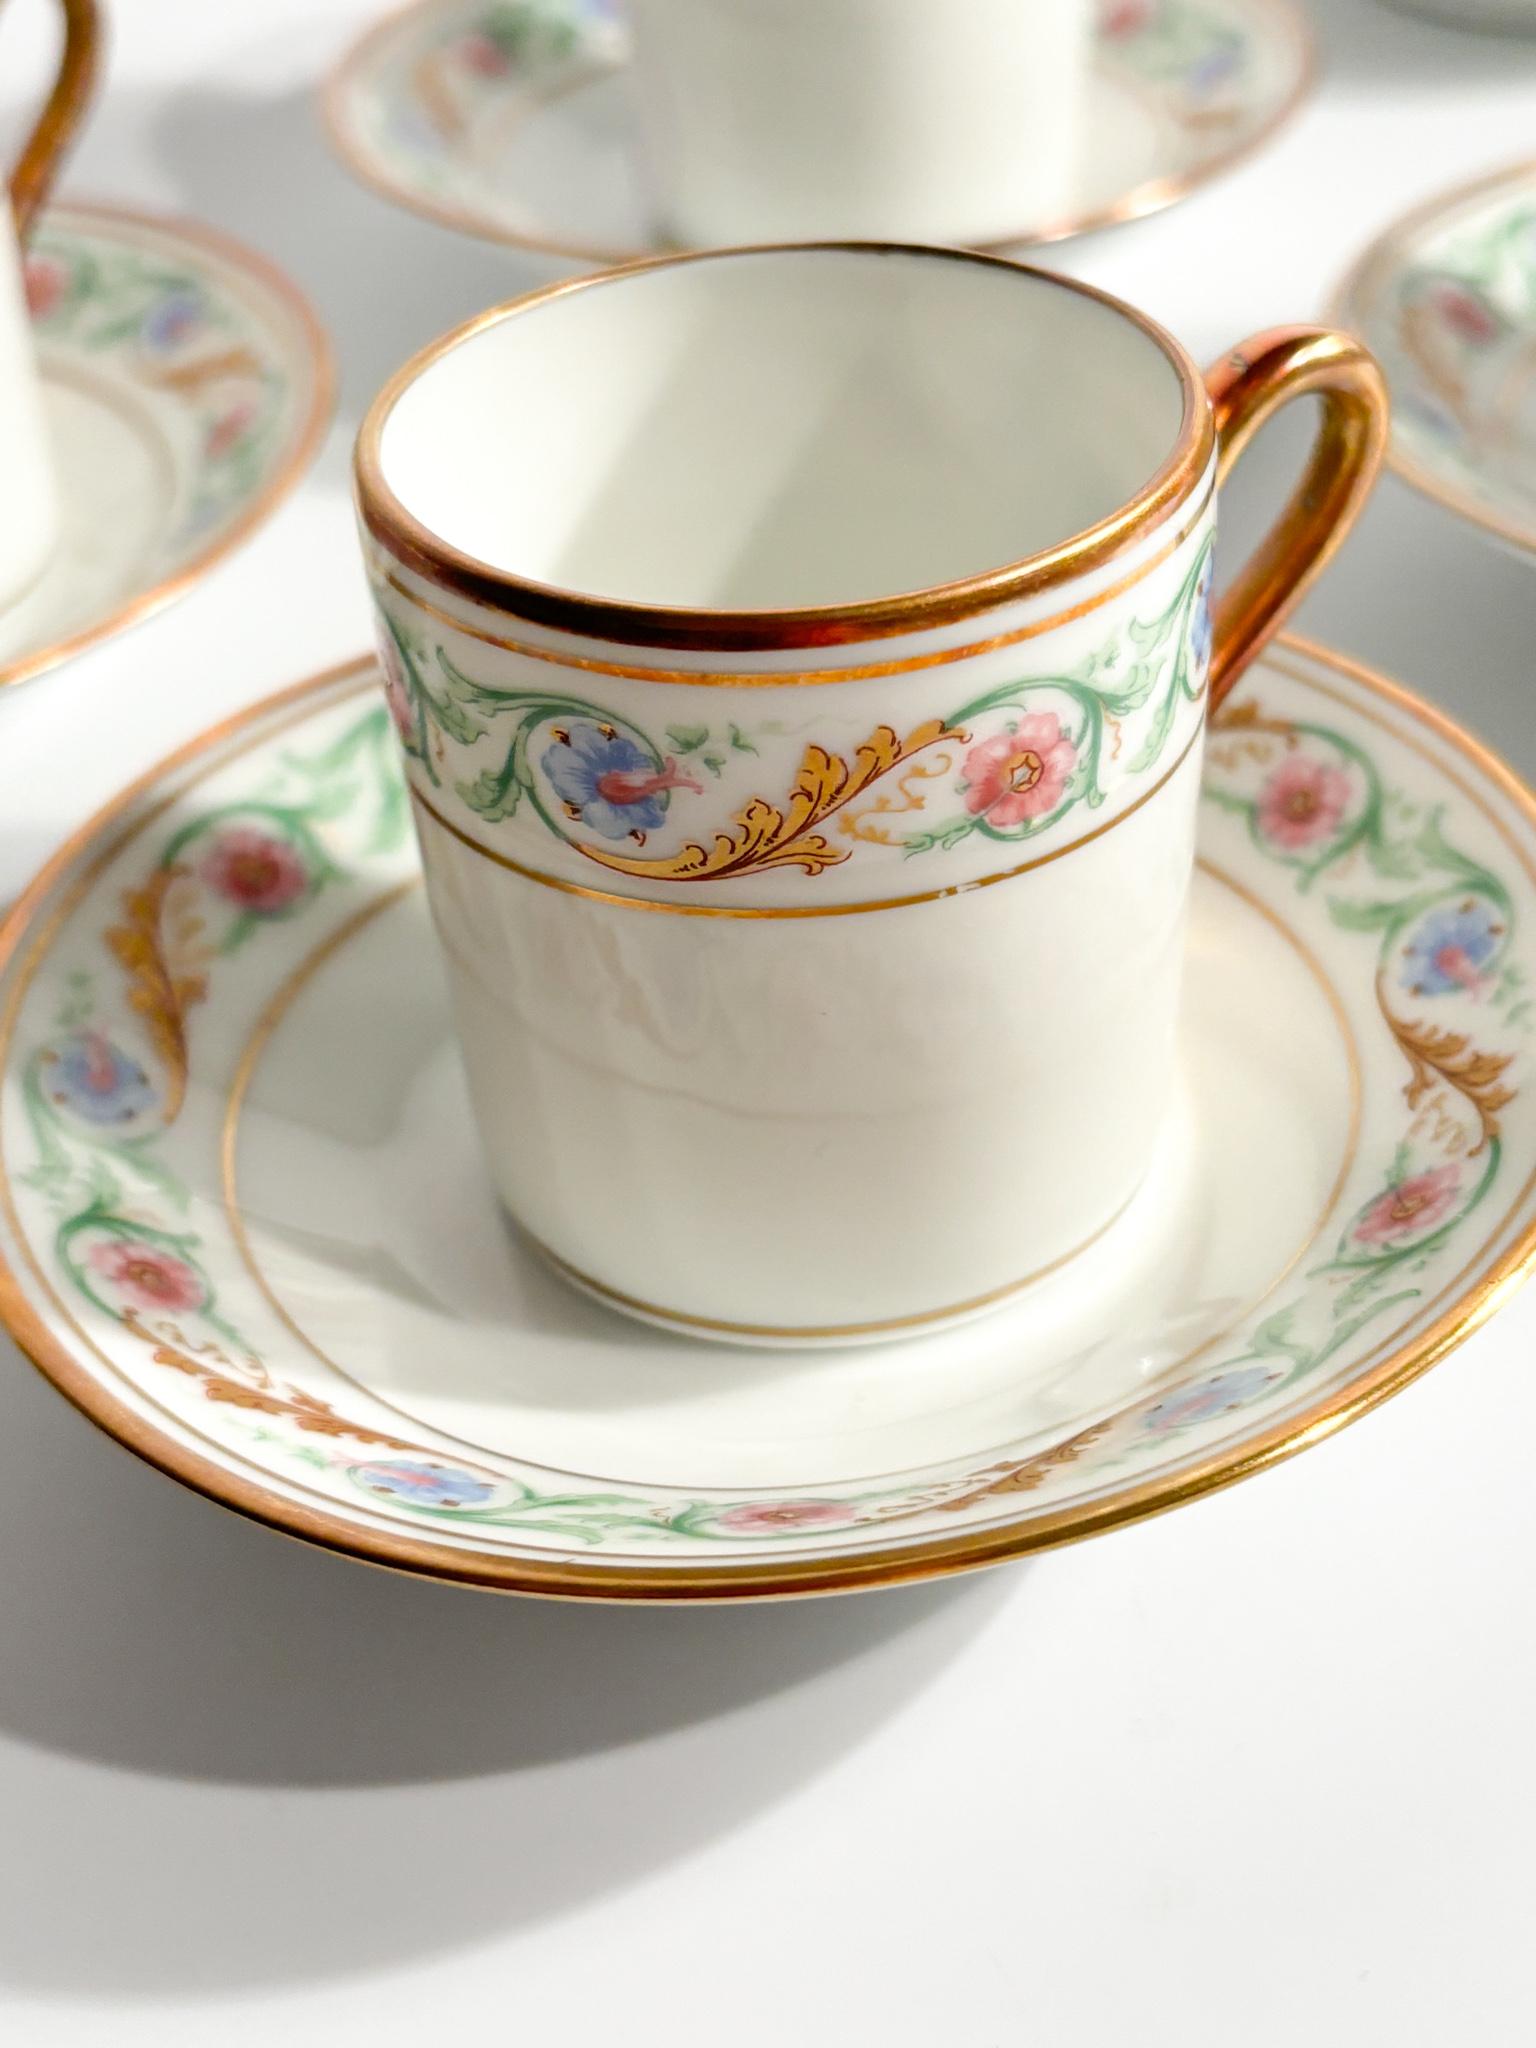 Set of Six Porcelain Coffee Cups by Ginori Doccia Pittoria from the 1940s For Sale 2